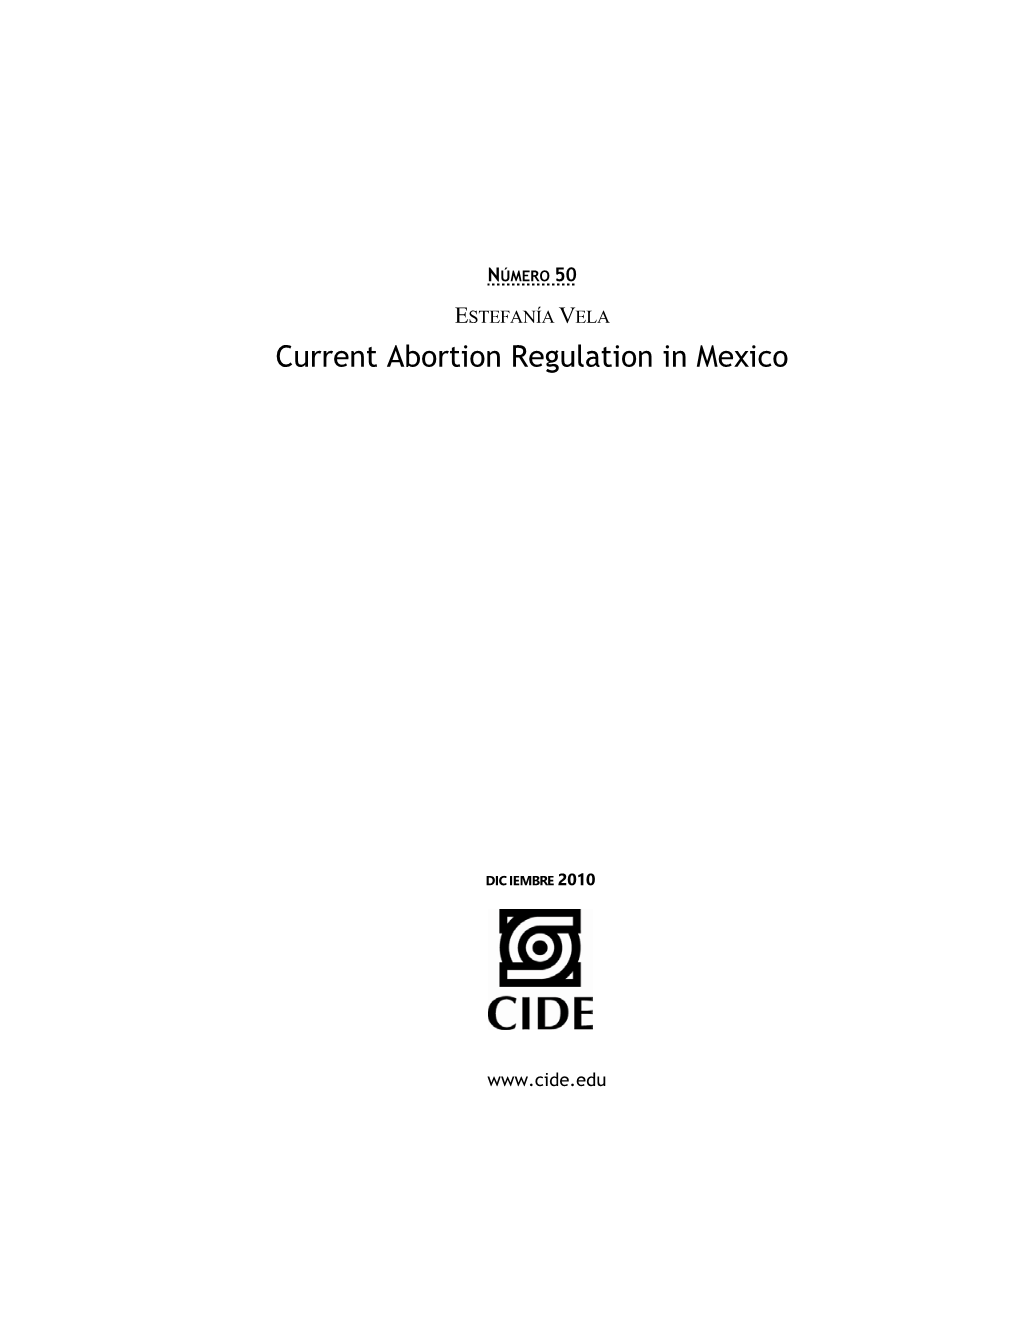 Current Abortion Regulation in Mexico